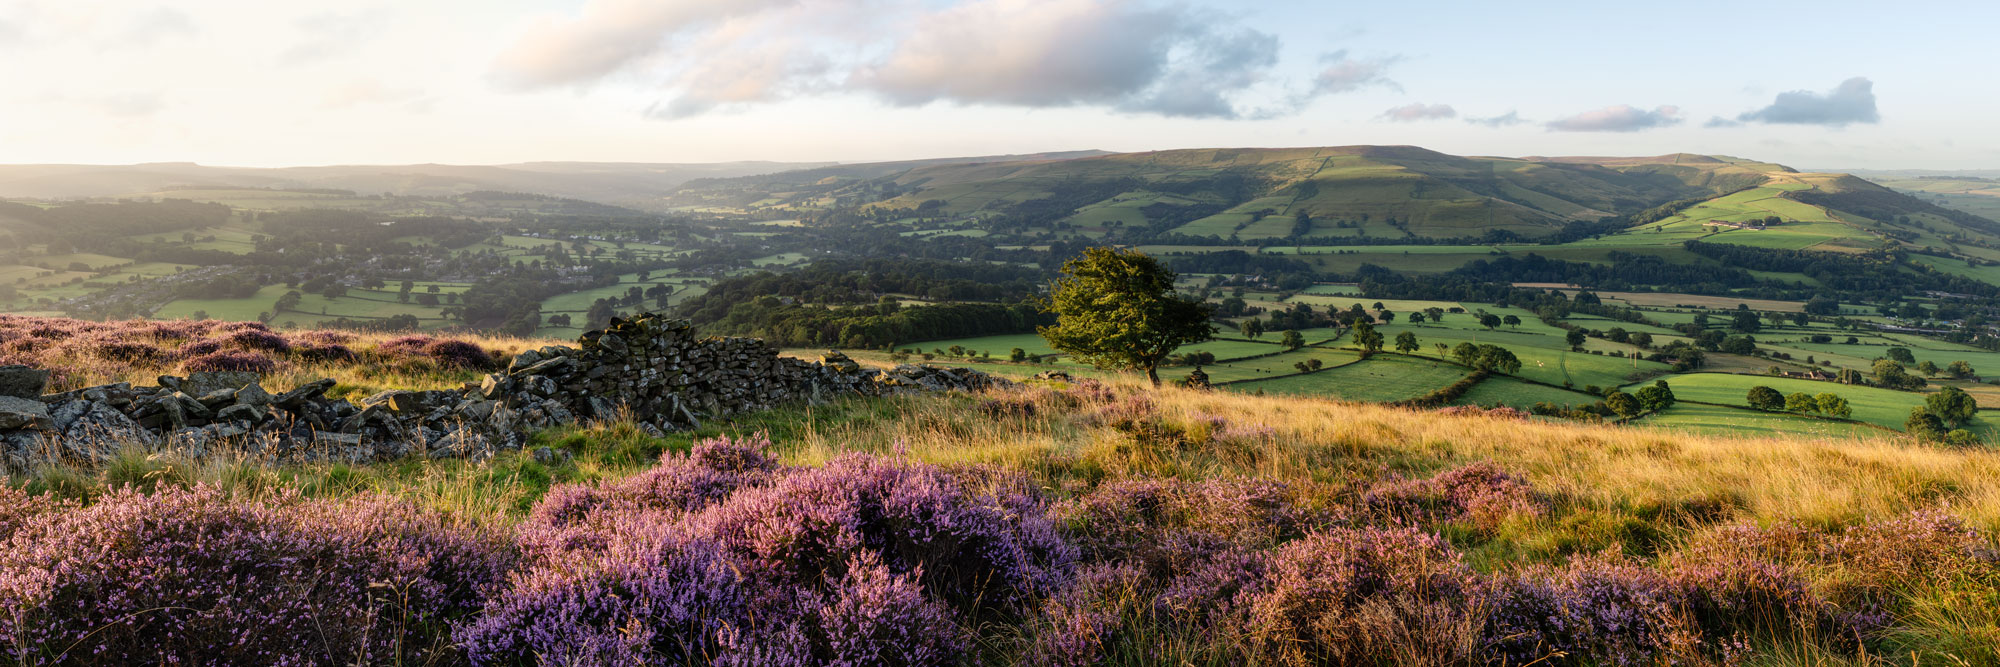 Panoramic print of Heather Blooming in Hope Valley in the Peak District